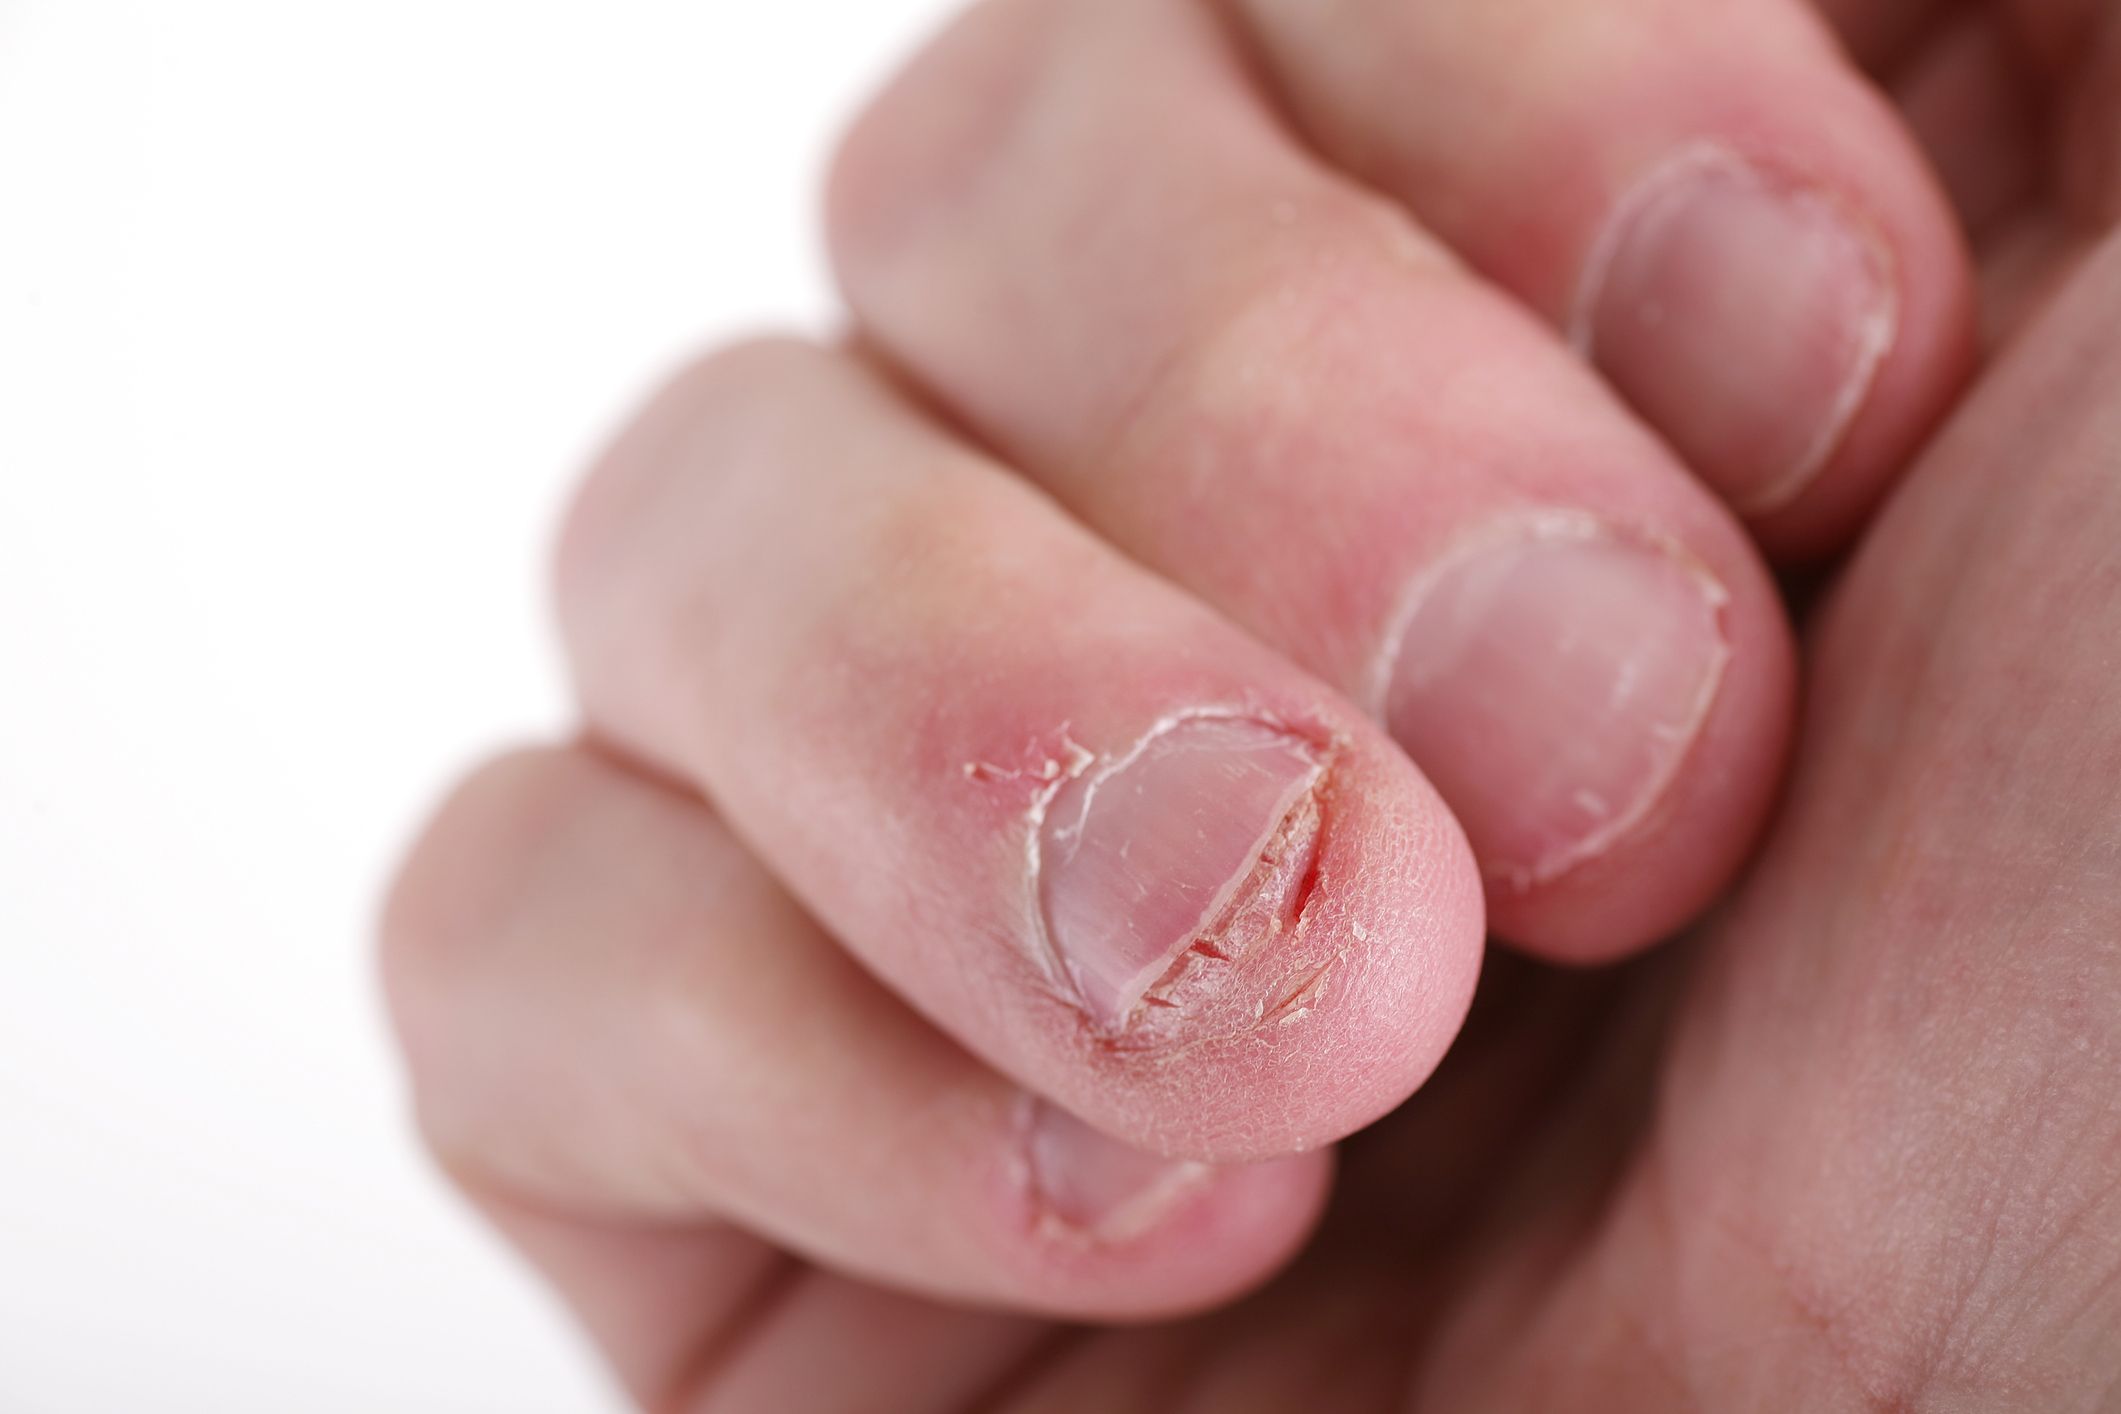 Nail Biting Infection: What Is It, Causes, and Treatment